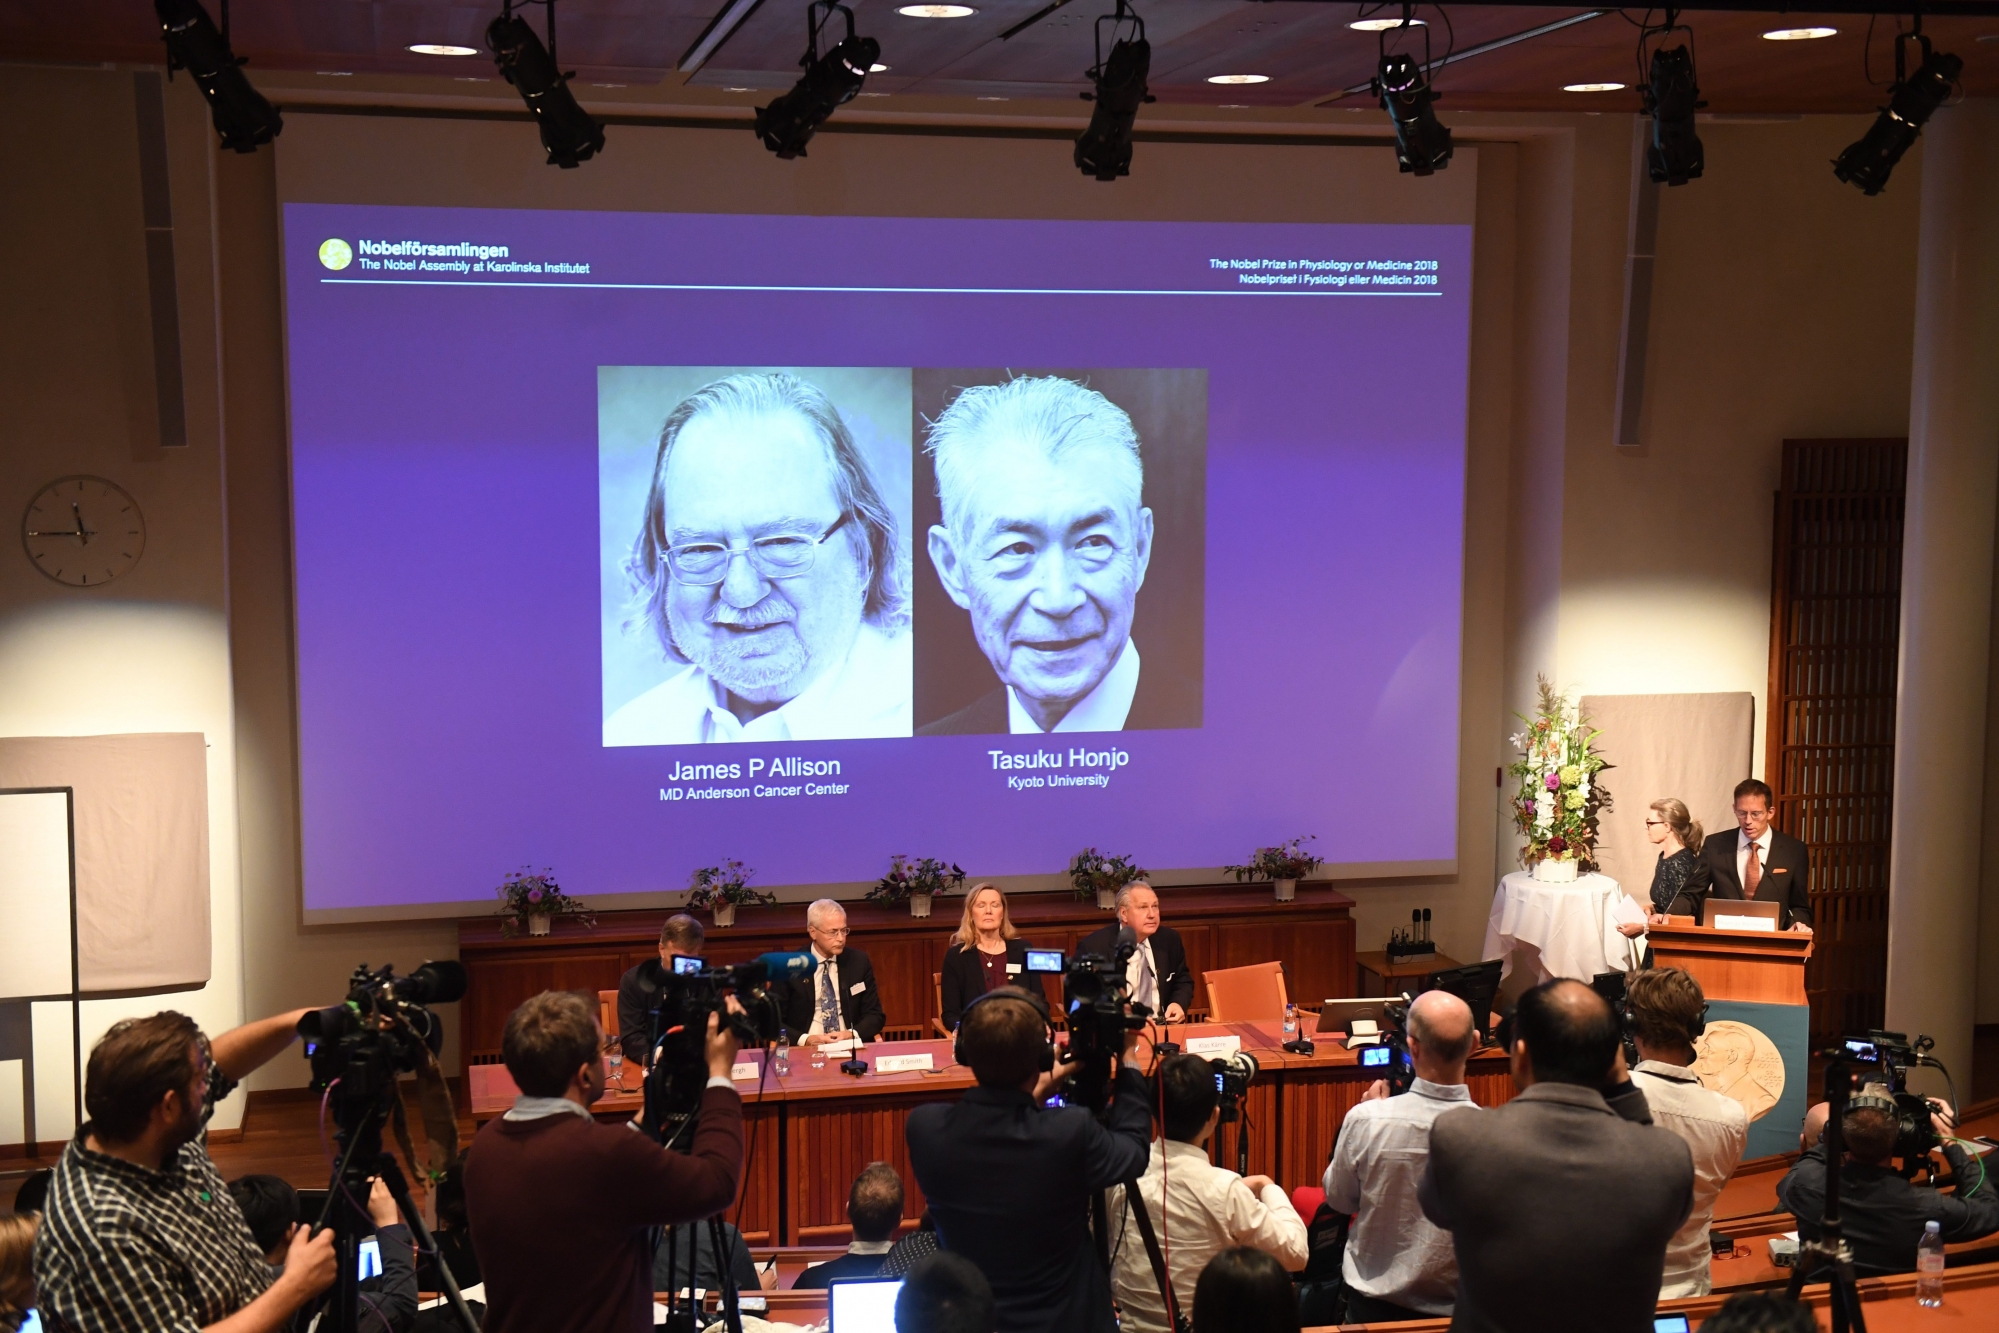 epa07061056 Portraits of the Nobel prize laureate in medicine or physiology 2018, showing James P. Allison (L) of the MD Anderson Cancer Center, USA, and Tasuku Honjo (R) from the Kyoto University, Japan, are presented at the press conference of the Karolinska Institute in Stockholm, Sweden, 01 October 2018.  EPA/FREDRIK SANDBERG SWEDEN OUT SWEDEN NOBEL PRIZE 2018 MEDICINE